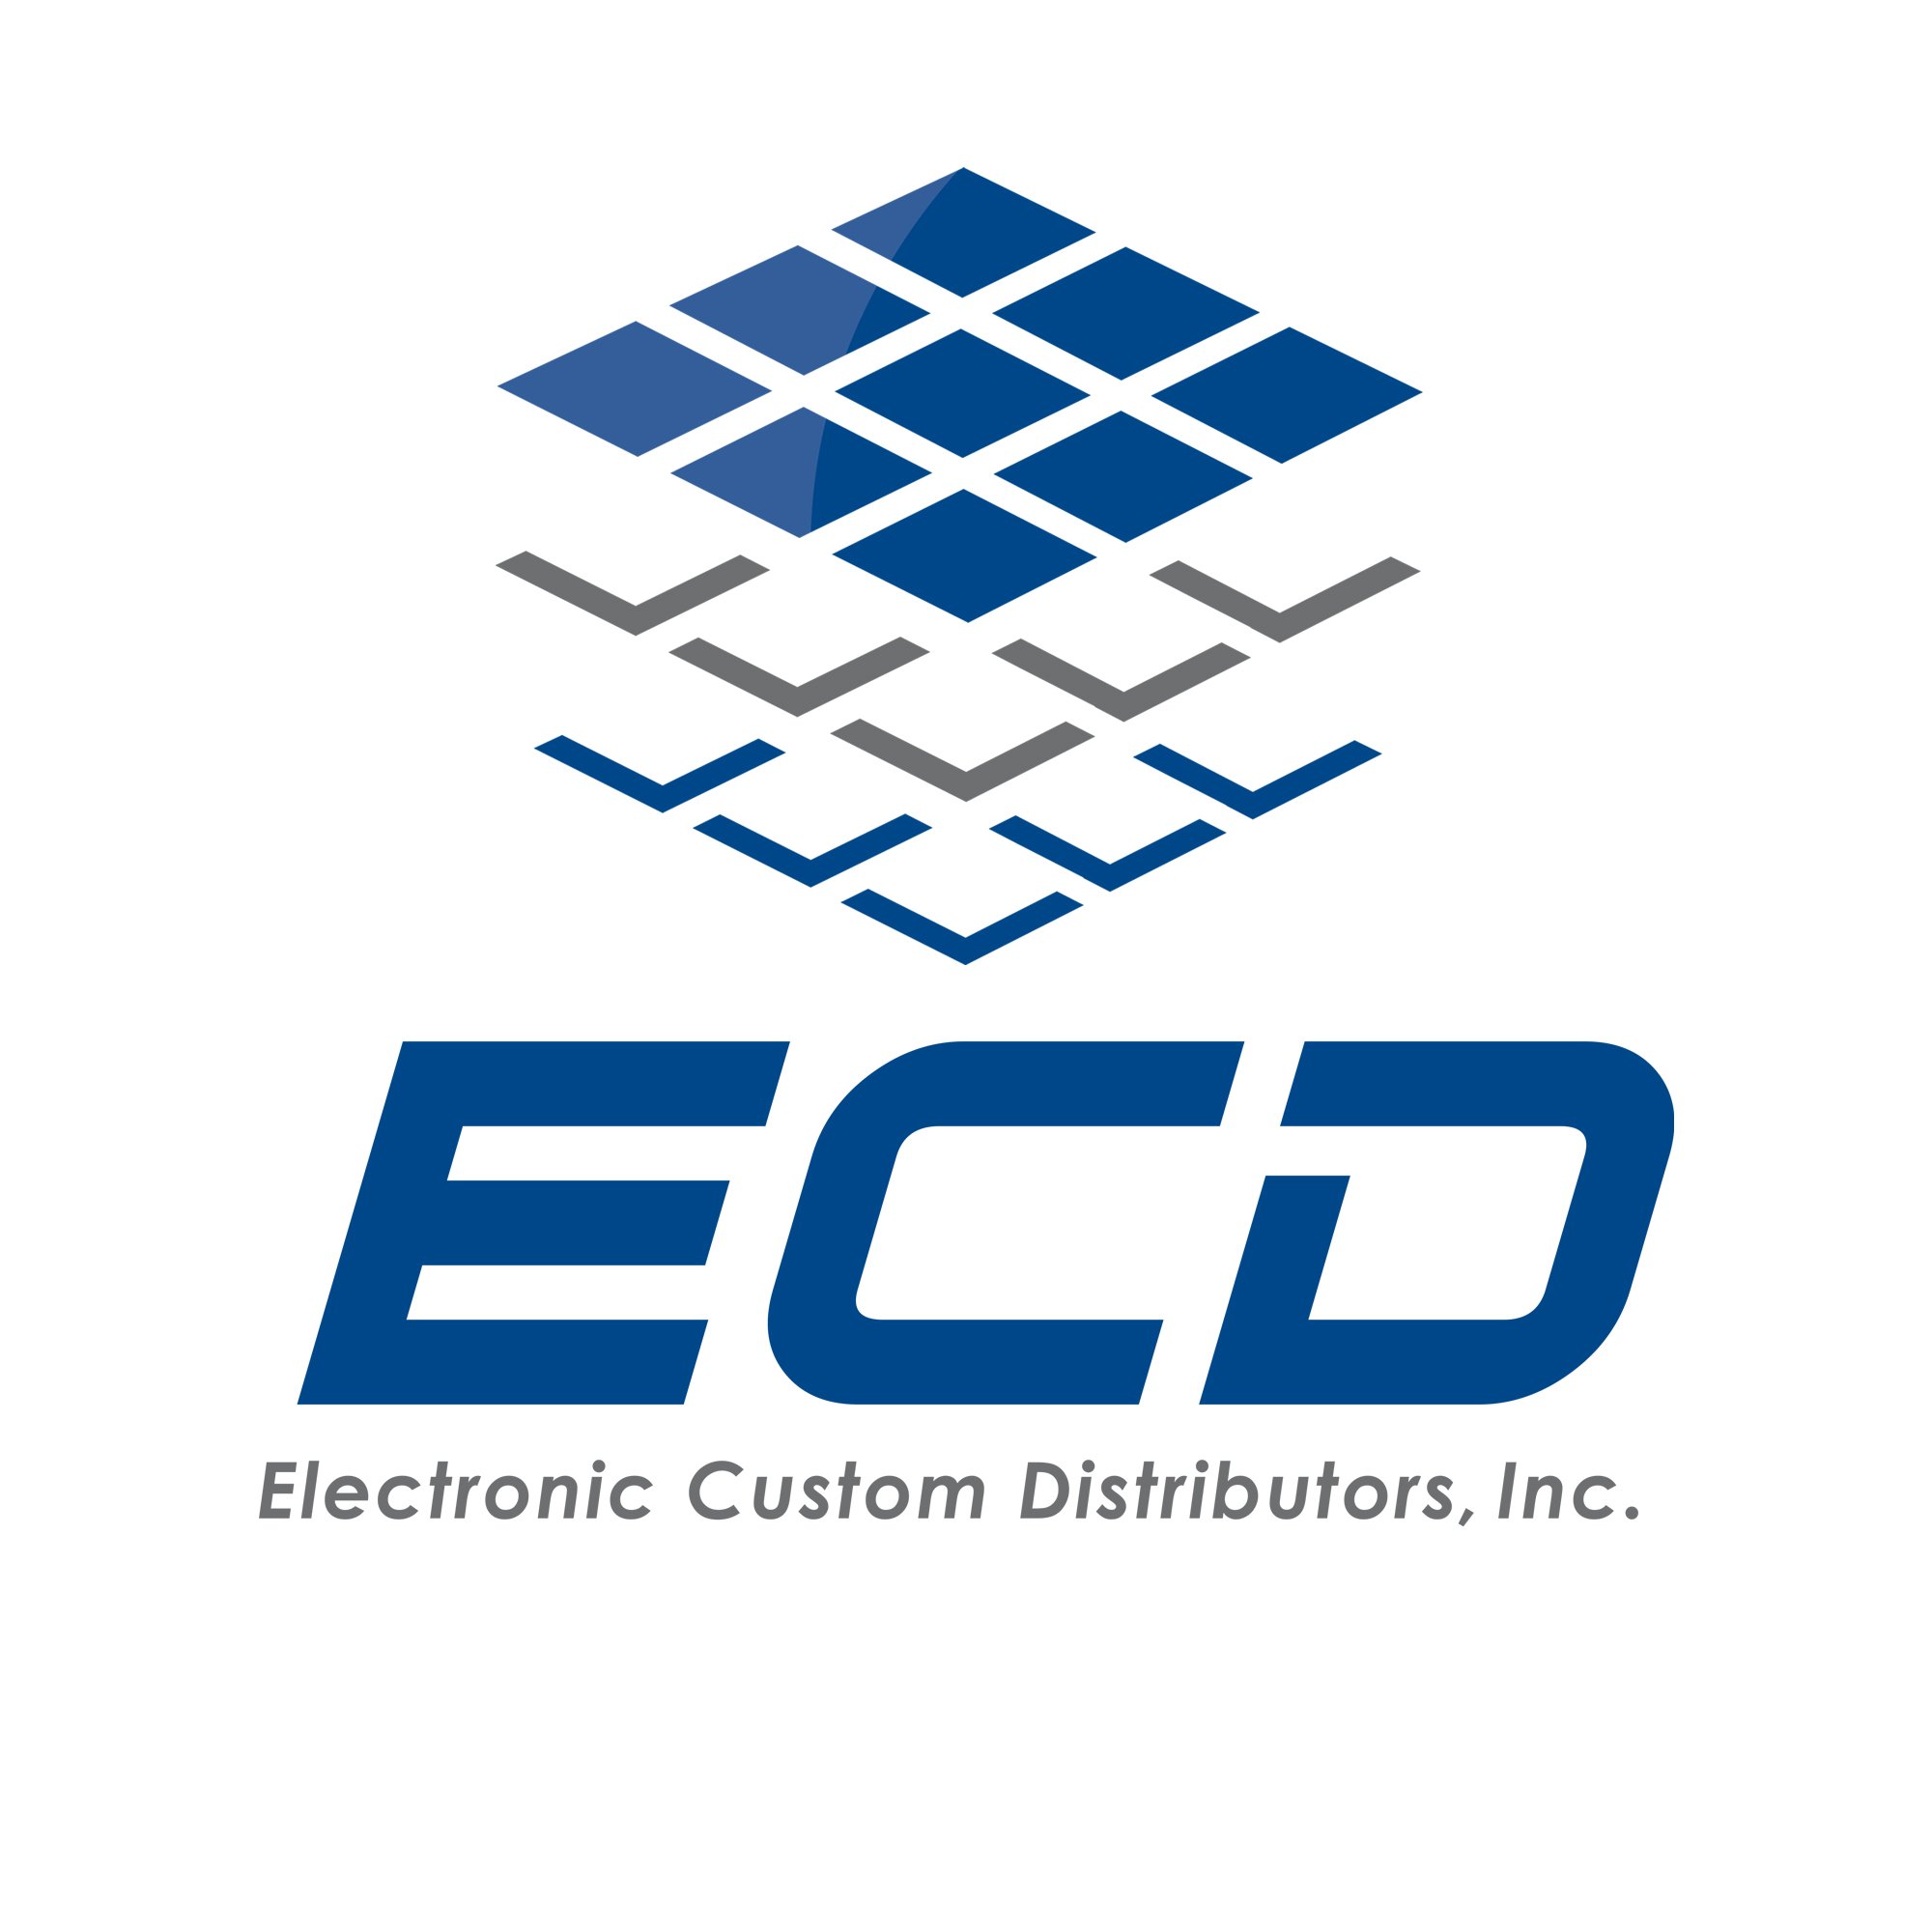 ECD distributes the world’s finest commercial and residential #audio, #video, #automation, #security, #wire and #telecommunication products. {since 1960}